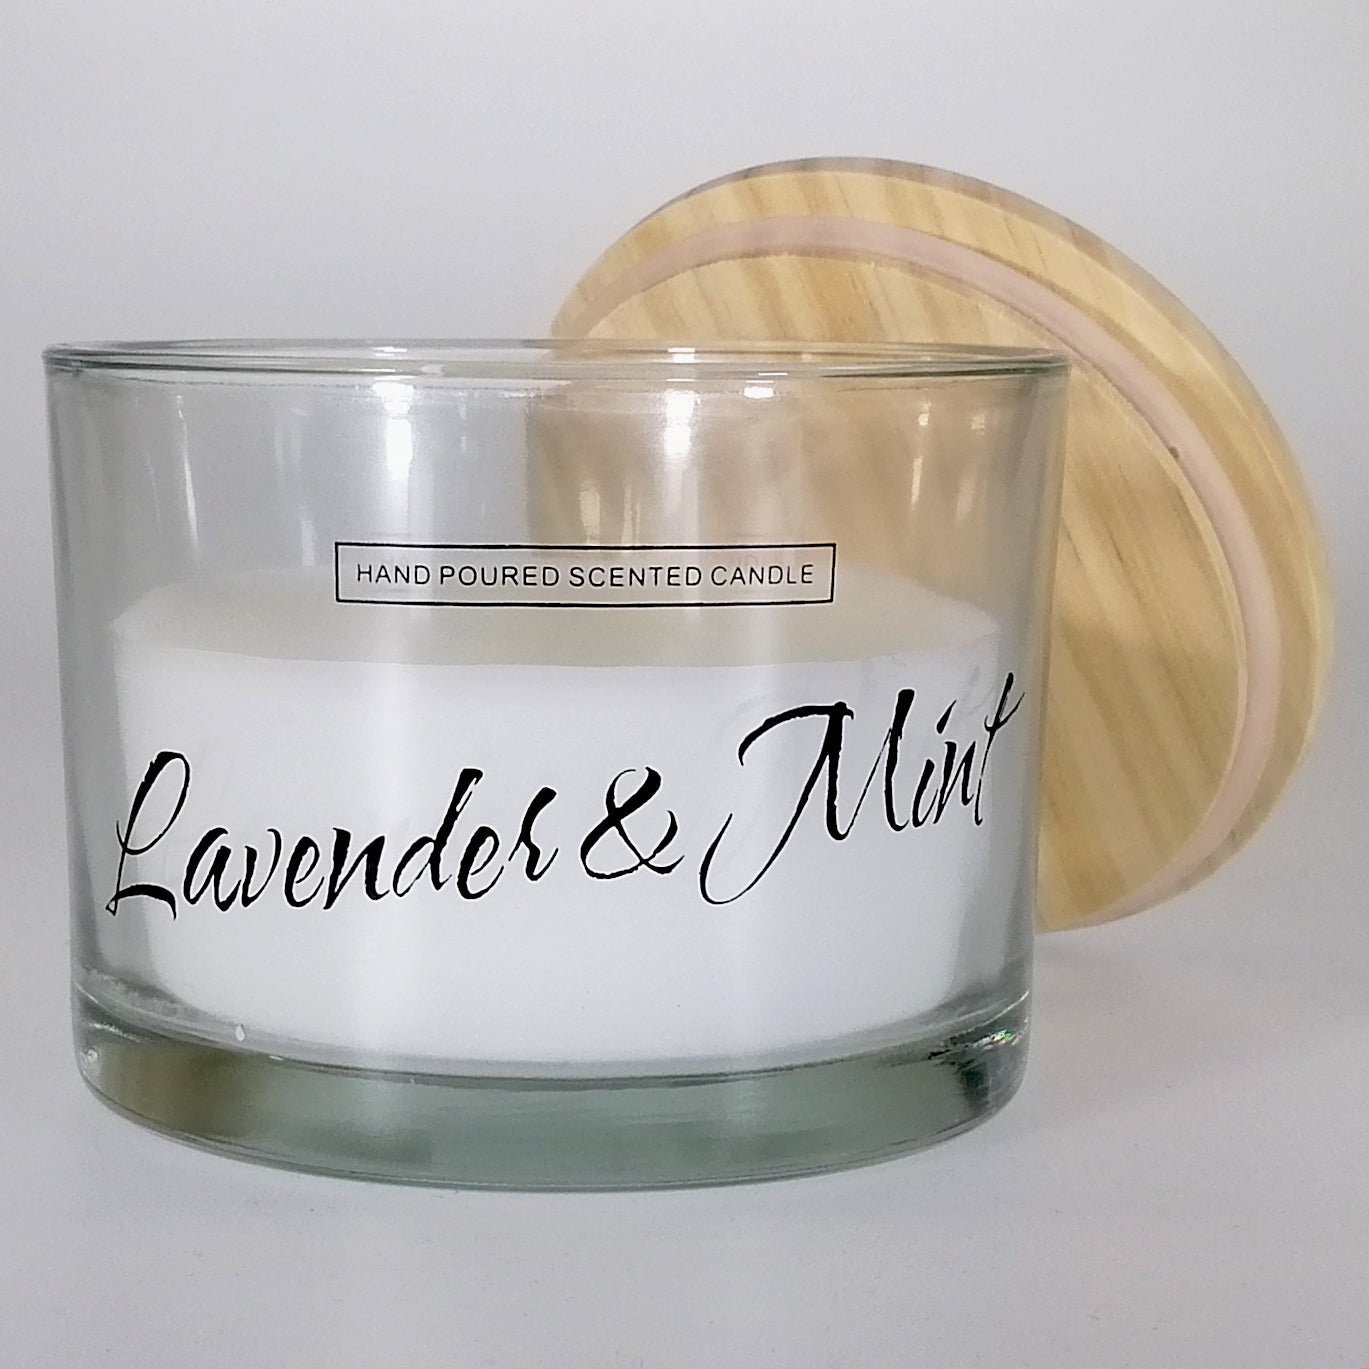 Glass Candle - Lavender & Mint